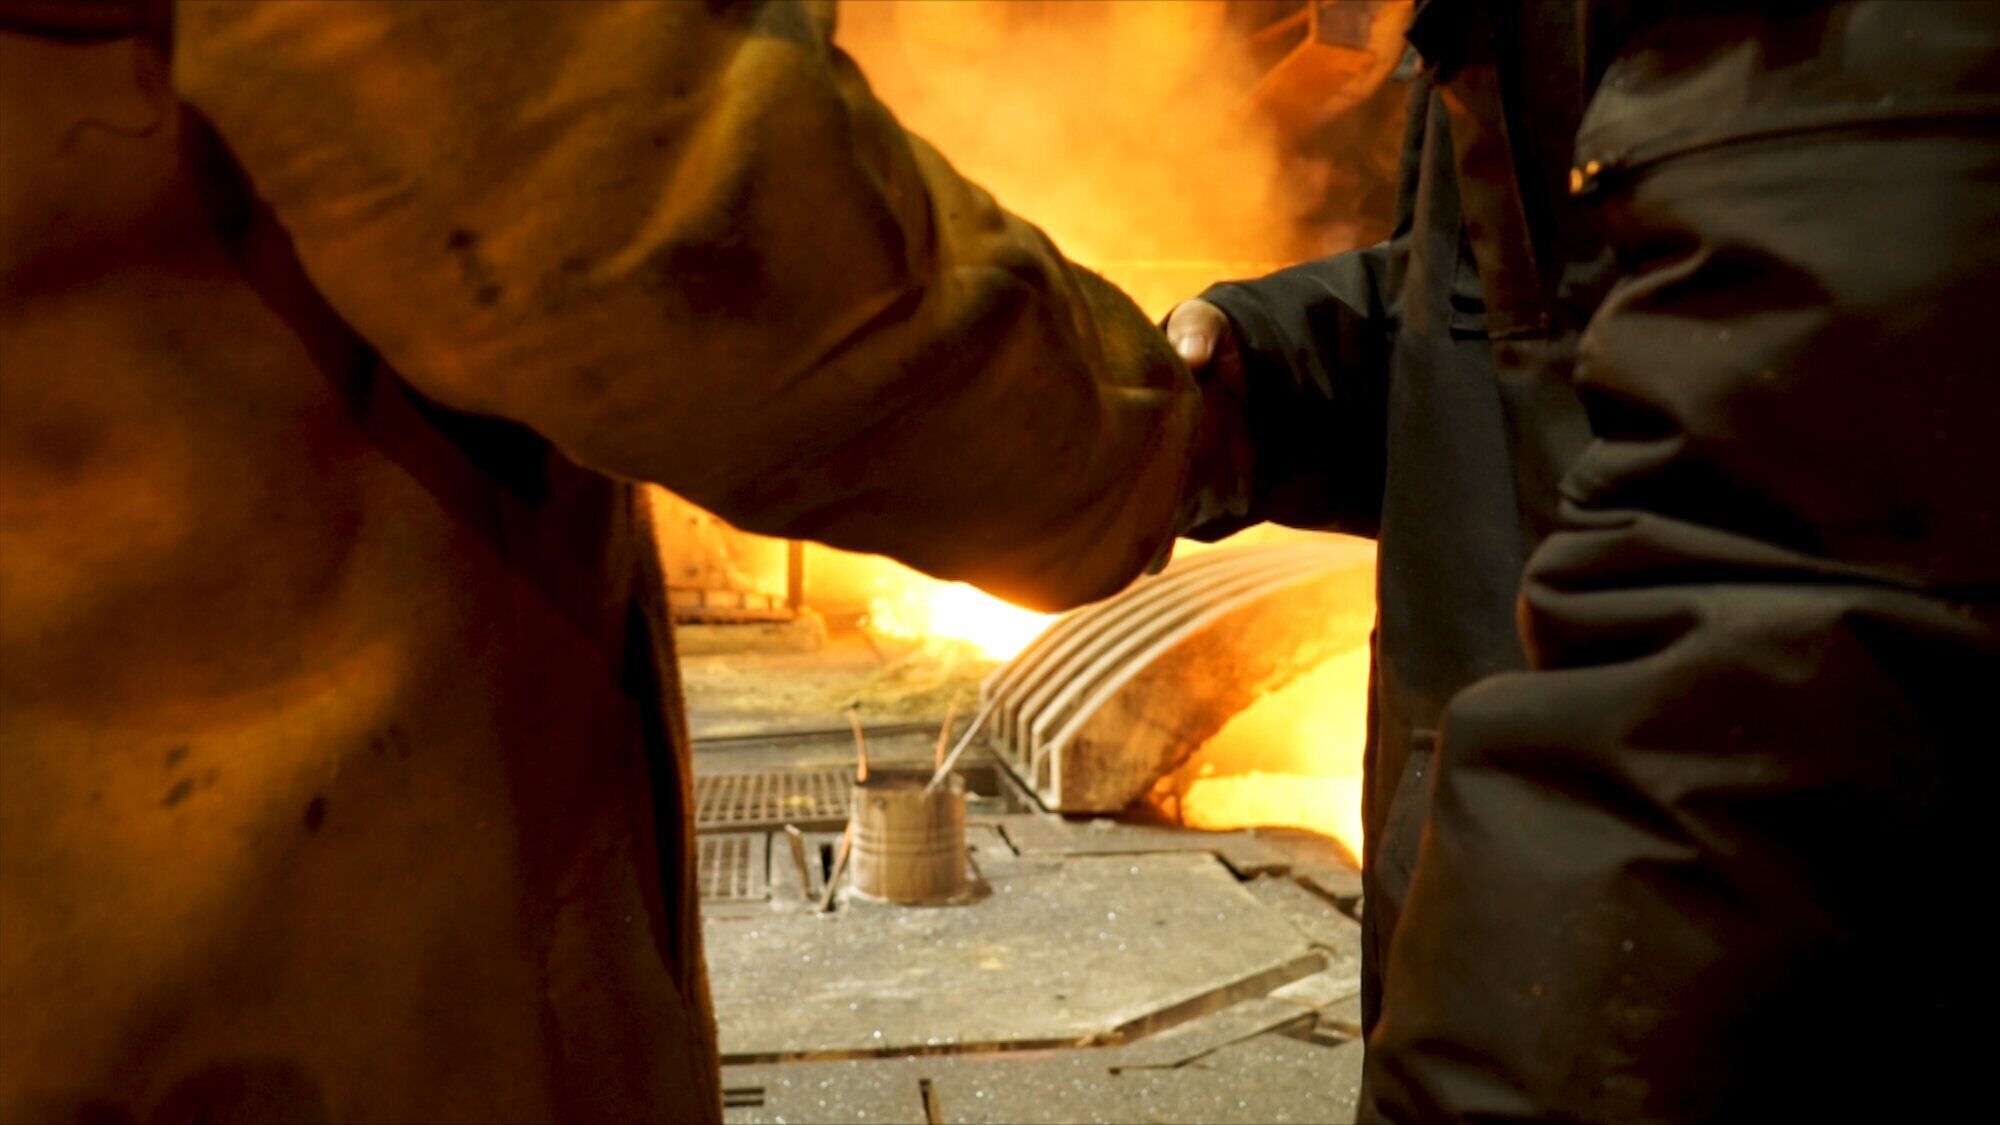 Rear view of two steelmakers at ingot casting shaking hands in front of electric arc furnace in hot shop, metallurgical production. Stock footage. Heavy industry and agreement concept.